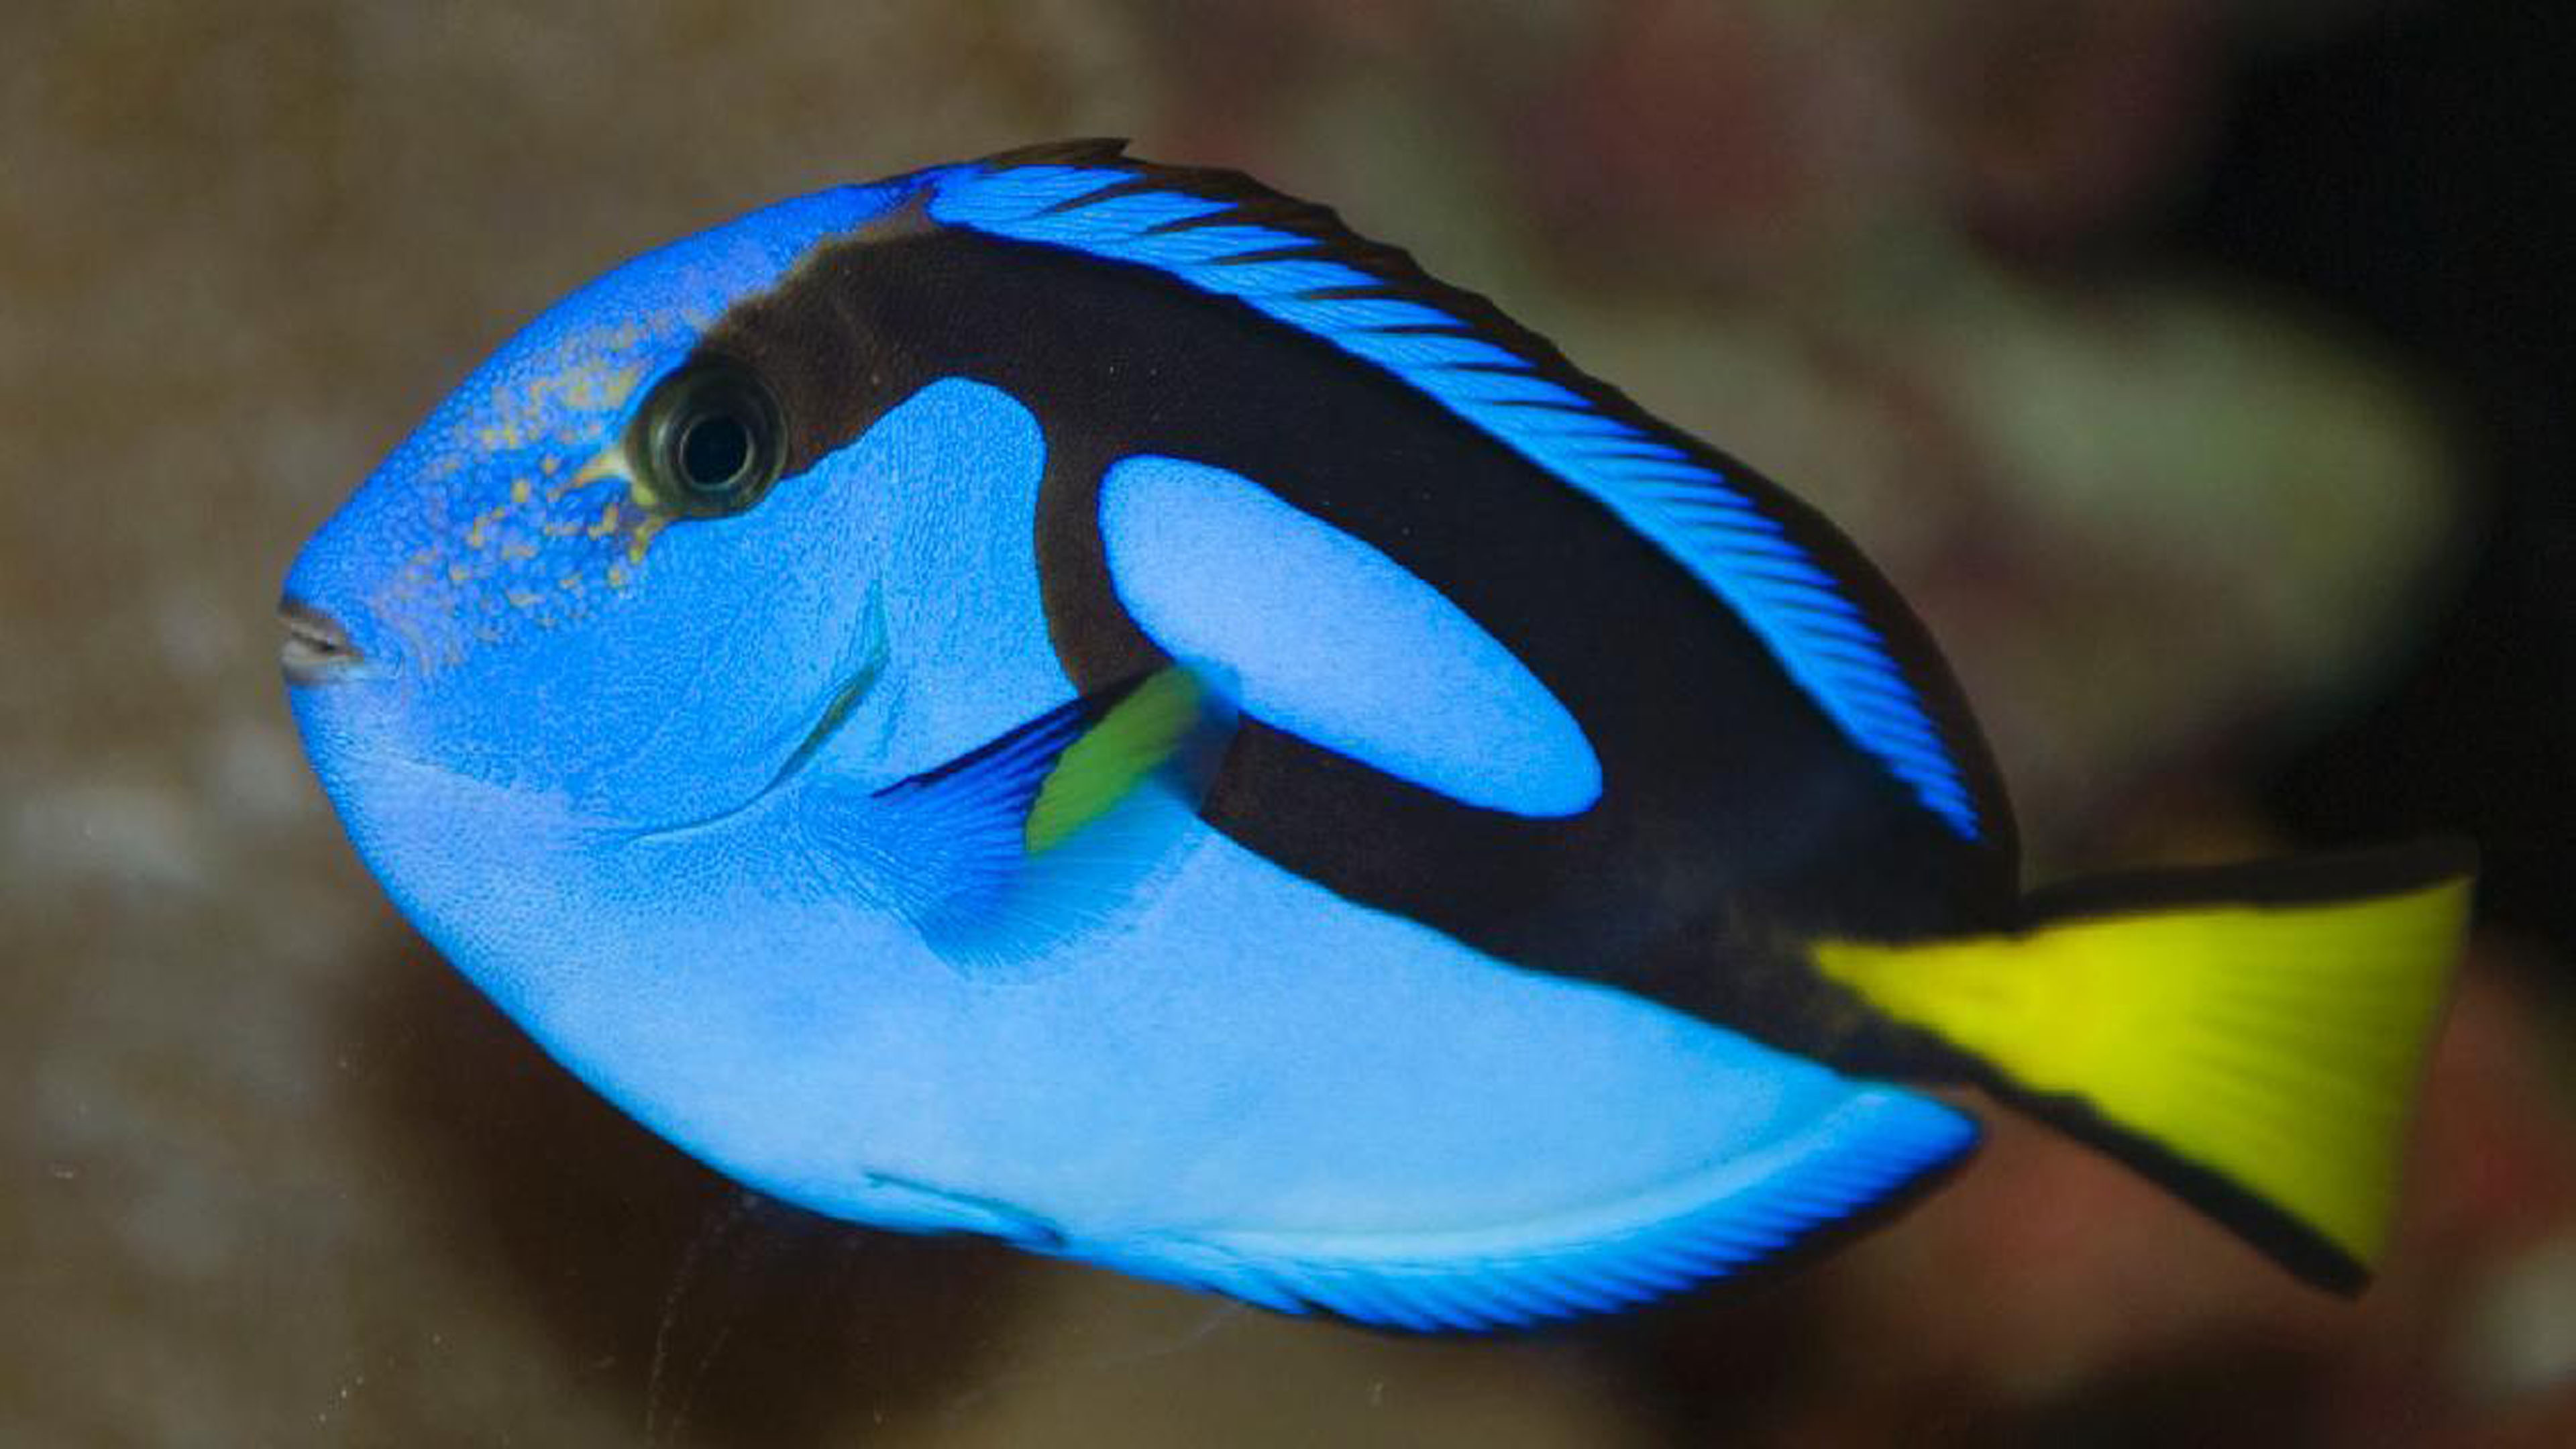 Blue Tang Or Flagtail Surgeonfish 3840x2400 : Wallpapers13.com